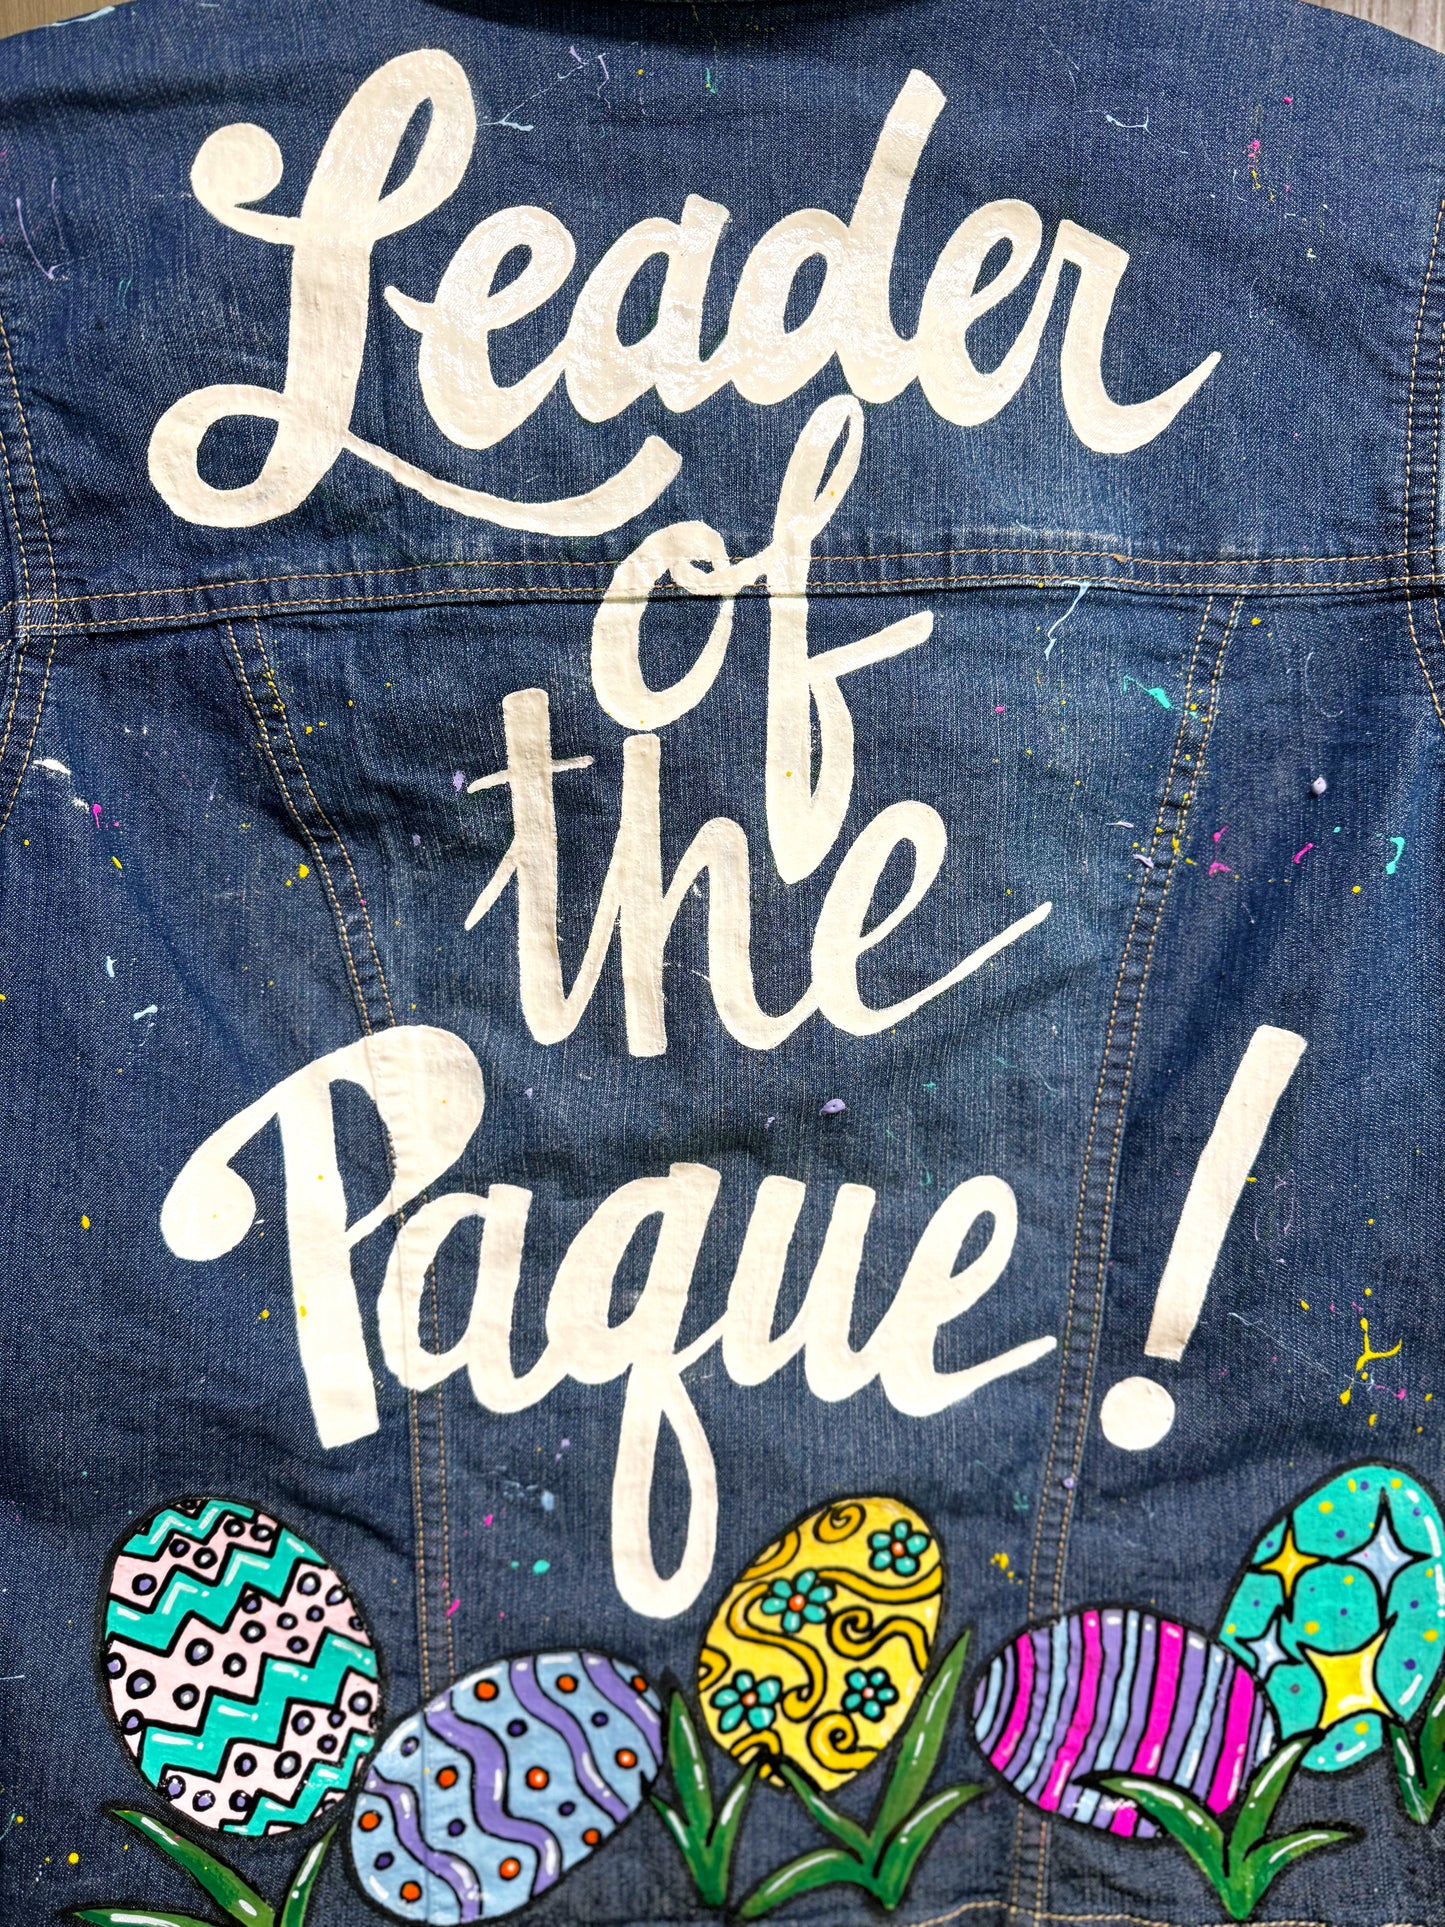 Hand Painted Jean Jacket: “Leader of the Paque”  - Cajun Jacket, Easter Jacket, New Orleans, Happy Easter, Egg Paqueing